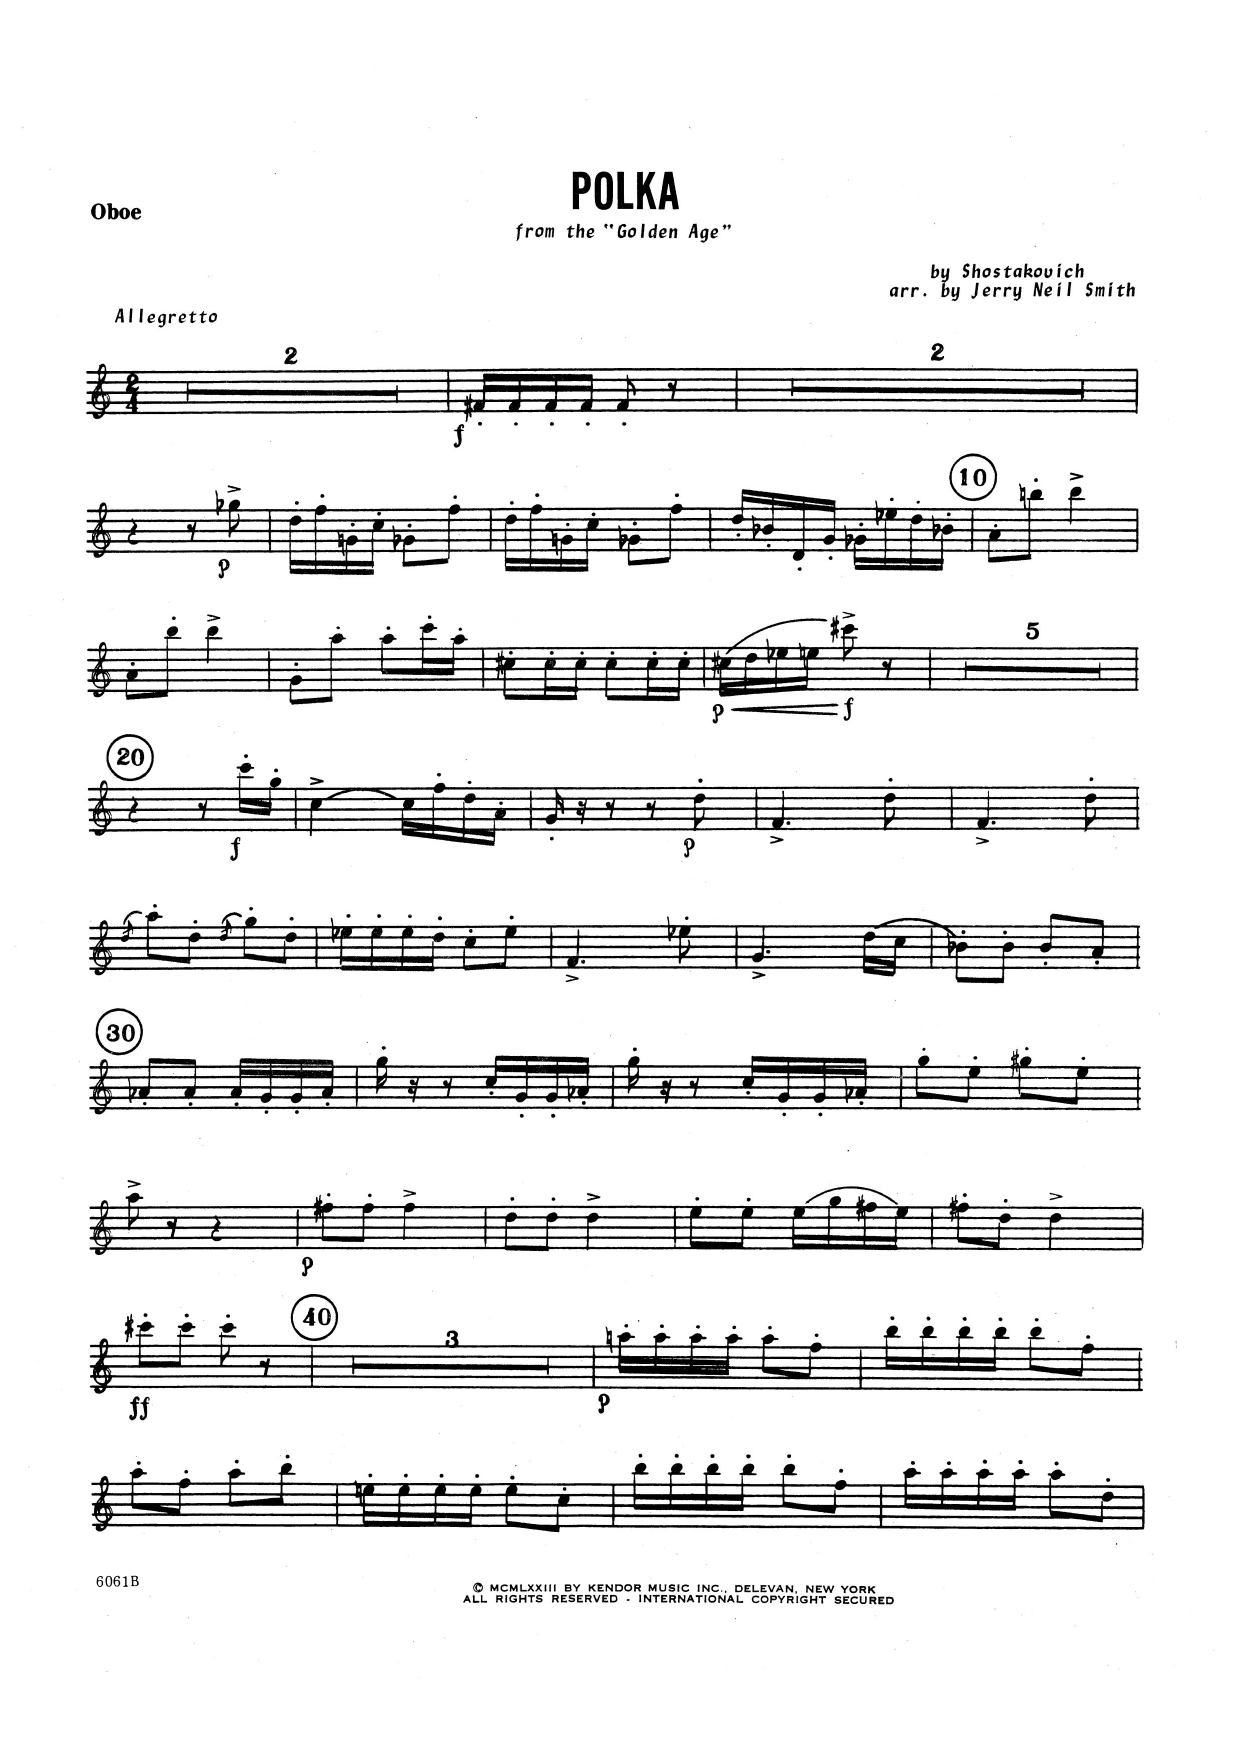 Download Jerry Smith Polka - Oboe Sheet Music